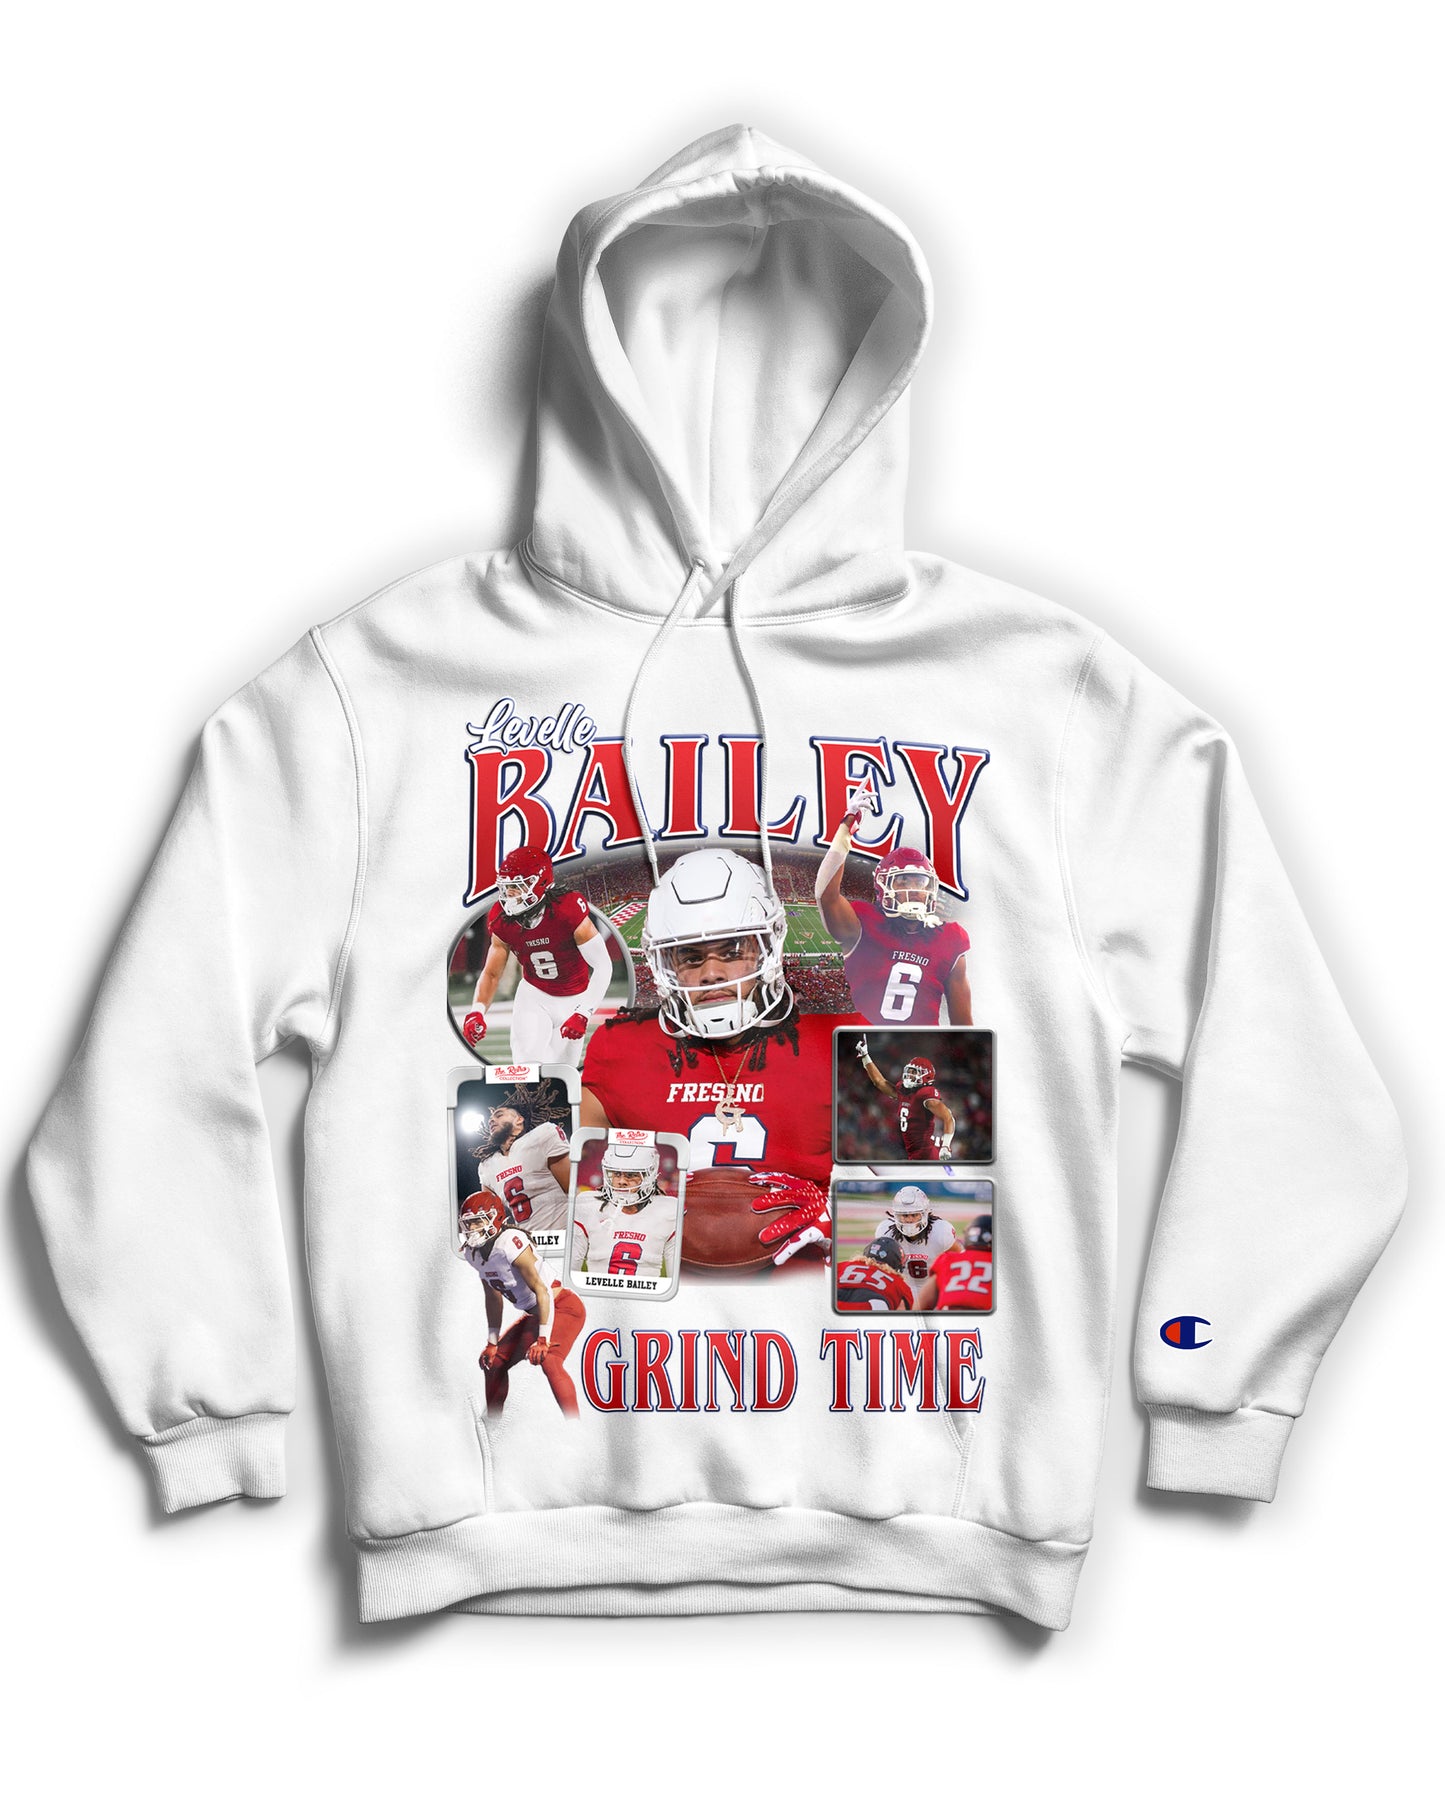 Levelle Bailey "GRIND TIME-DROP 2" Tribute Hoodie *LIMITED EDITION* (Black & White)